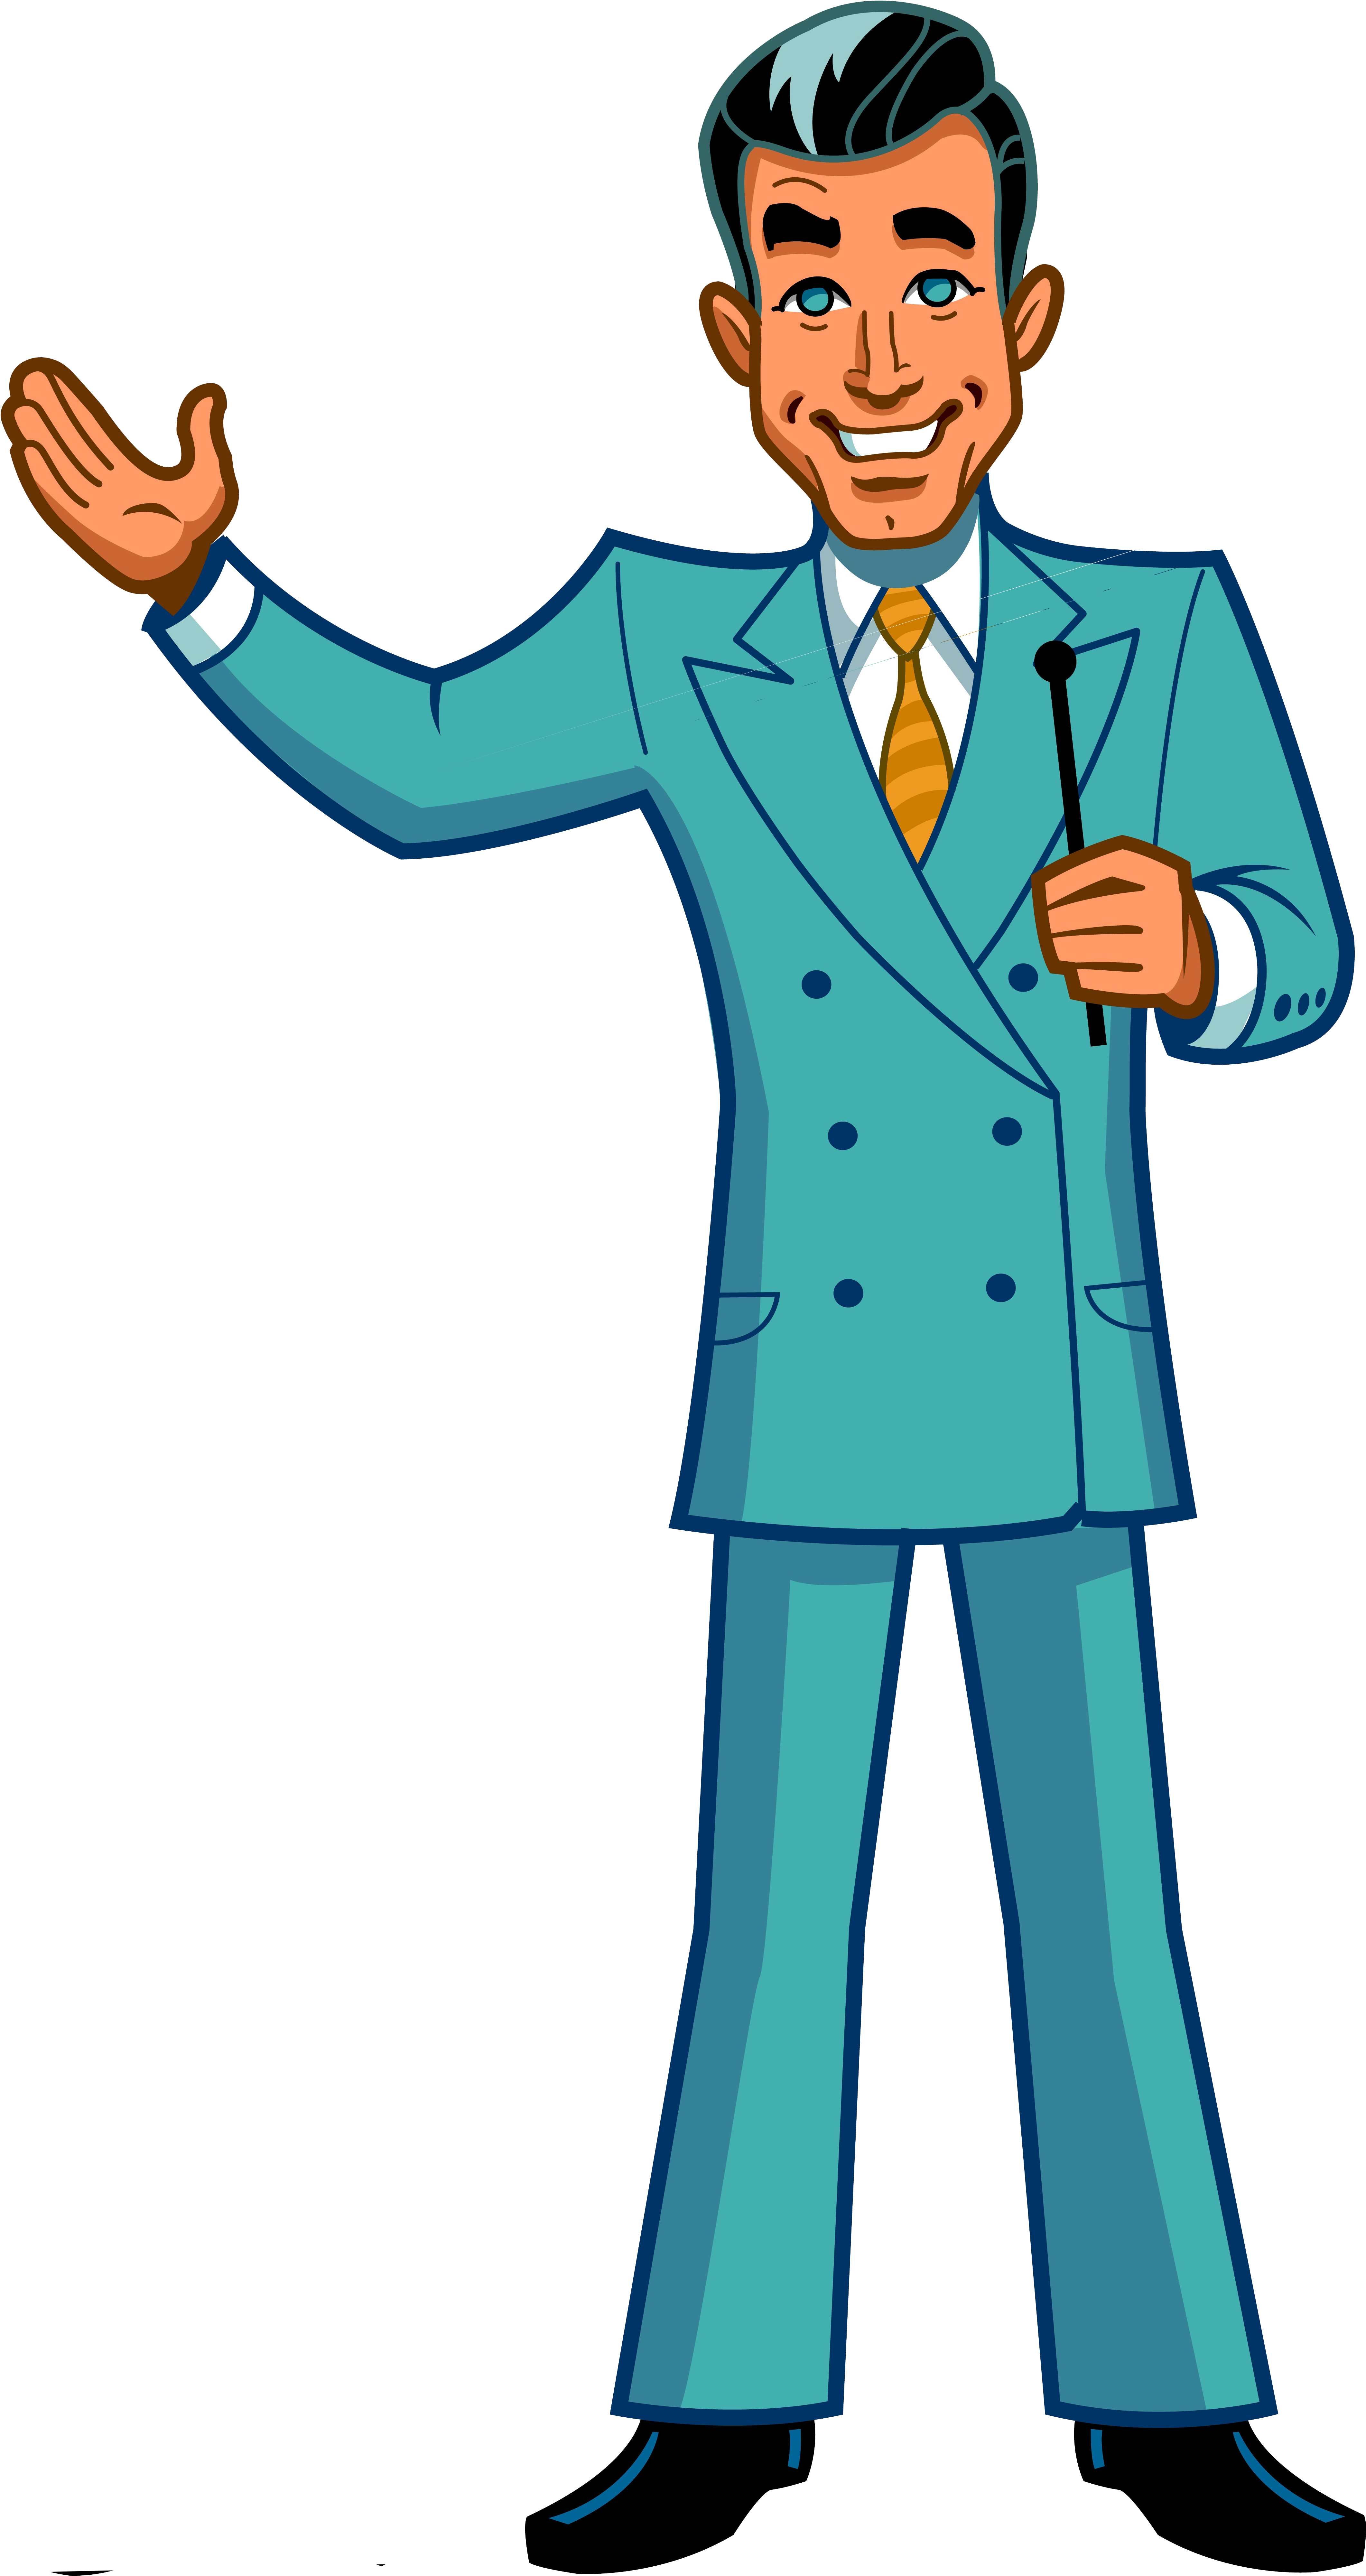 Game Show Host - Clipart Game Show Host (4378x8118)